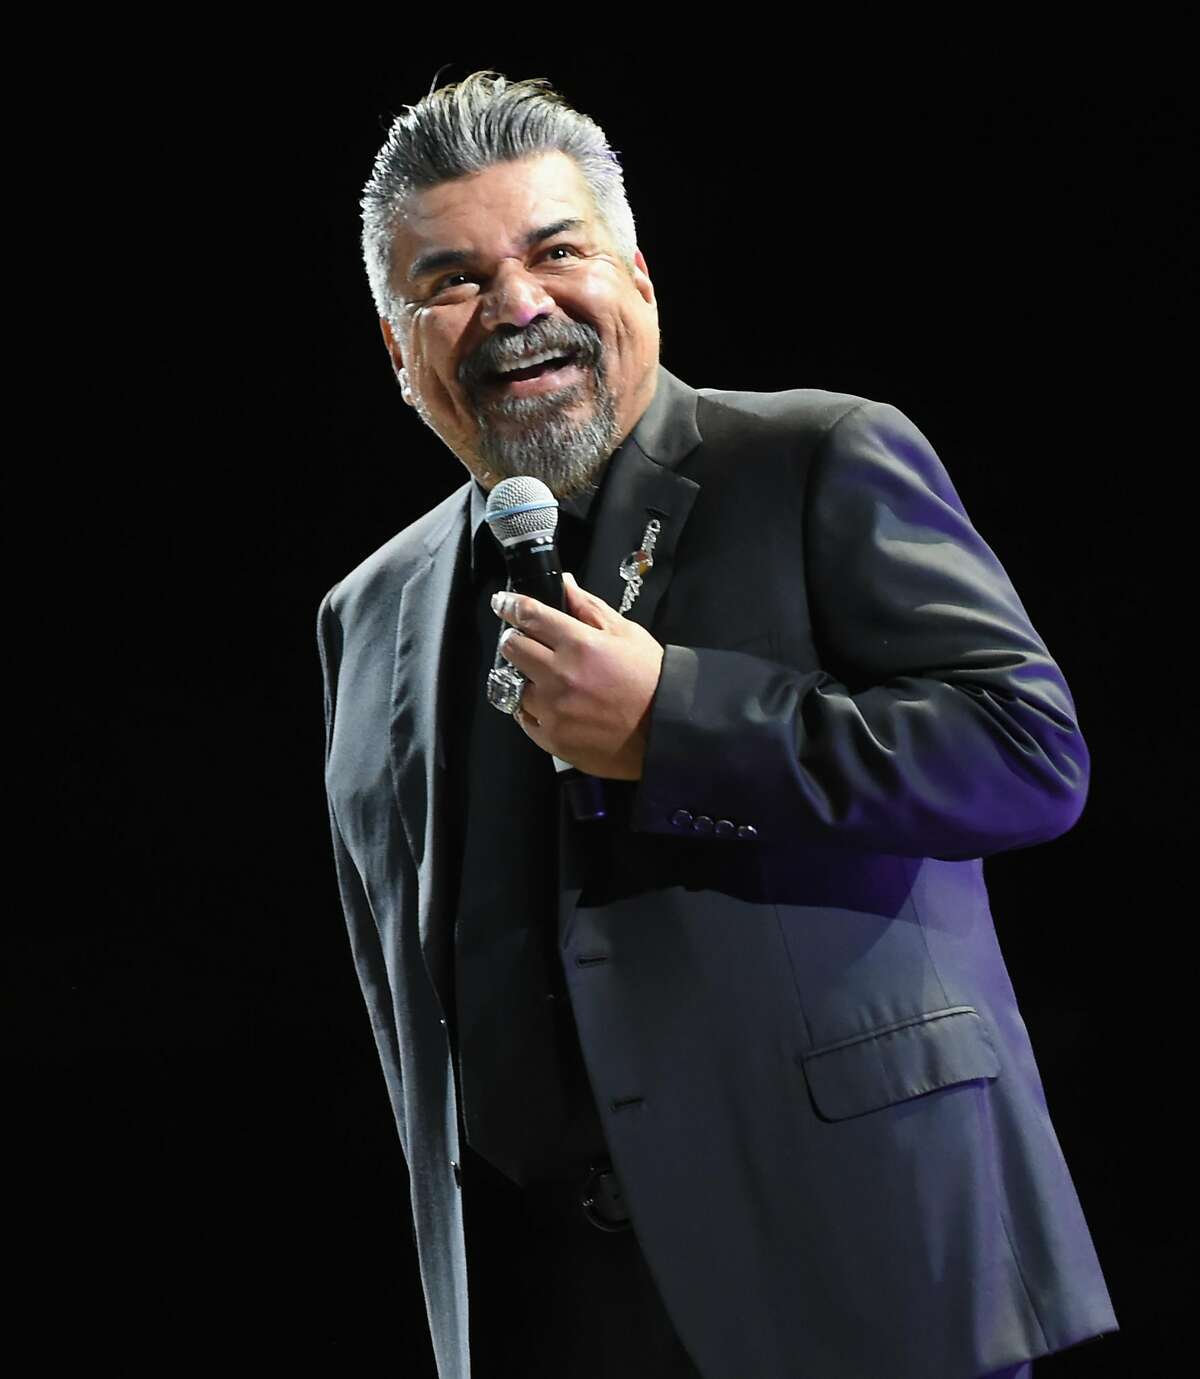 After a huge career spanning TV and film, legendary comedian and actor George Lopez is returning to his roots as a stand-up comedian, and will pay Laredo a visit as part of his newly announced stand-up tour throughout the U.S. 